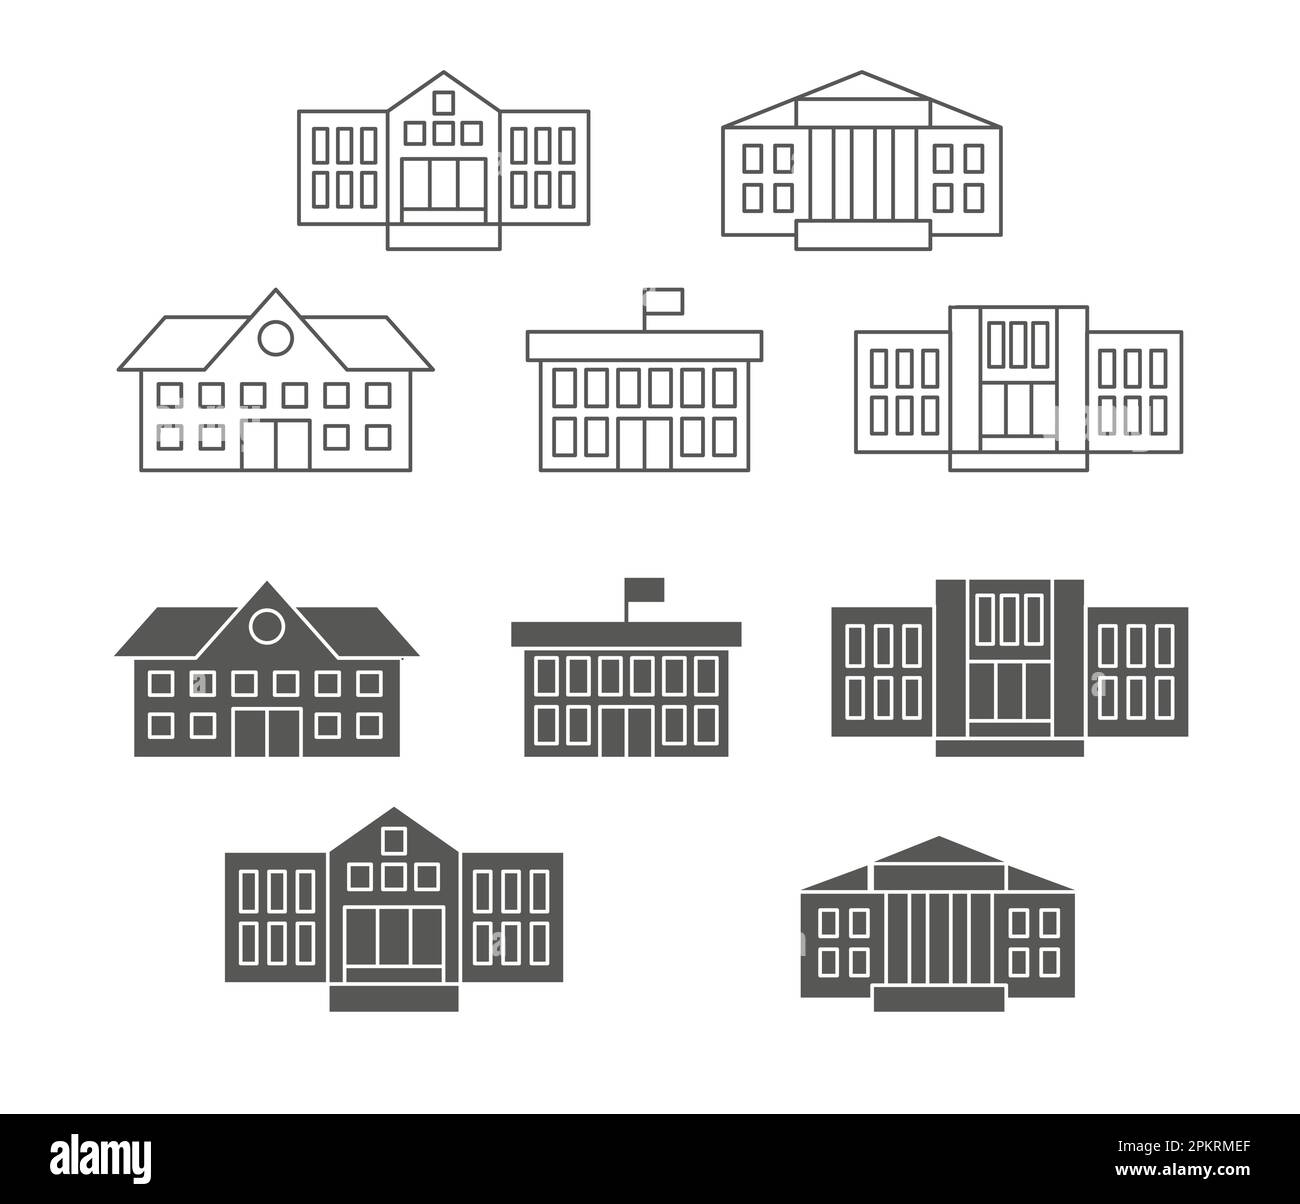 School education. University campus. College icons. High public buildings. Elementary facility. Library and preschool studying. Line or silhouette schoolhouse architecture. Vector outline symbols set Stock Vector